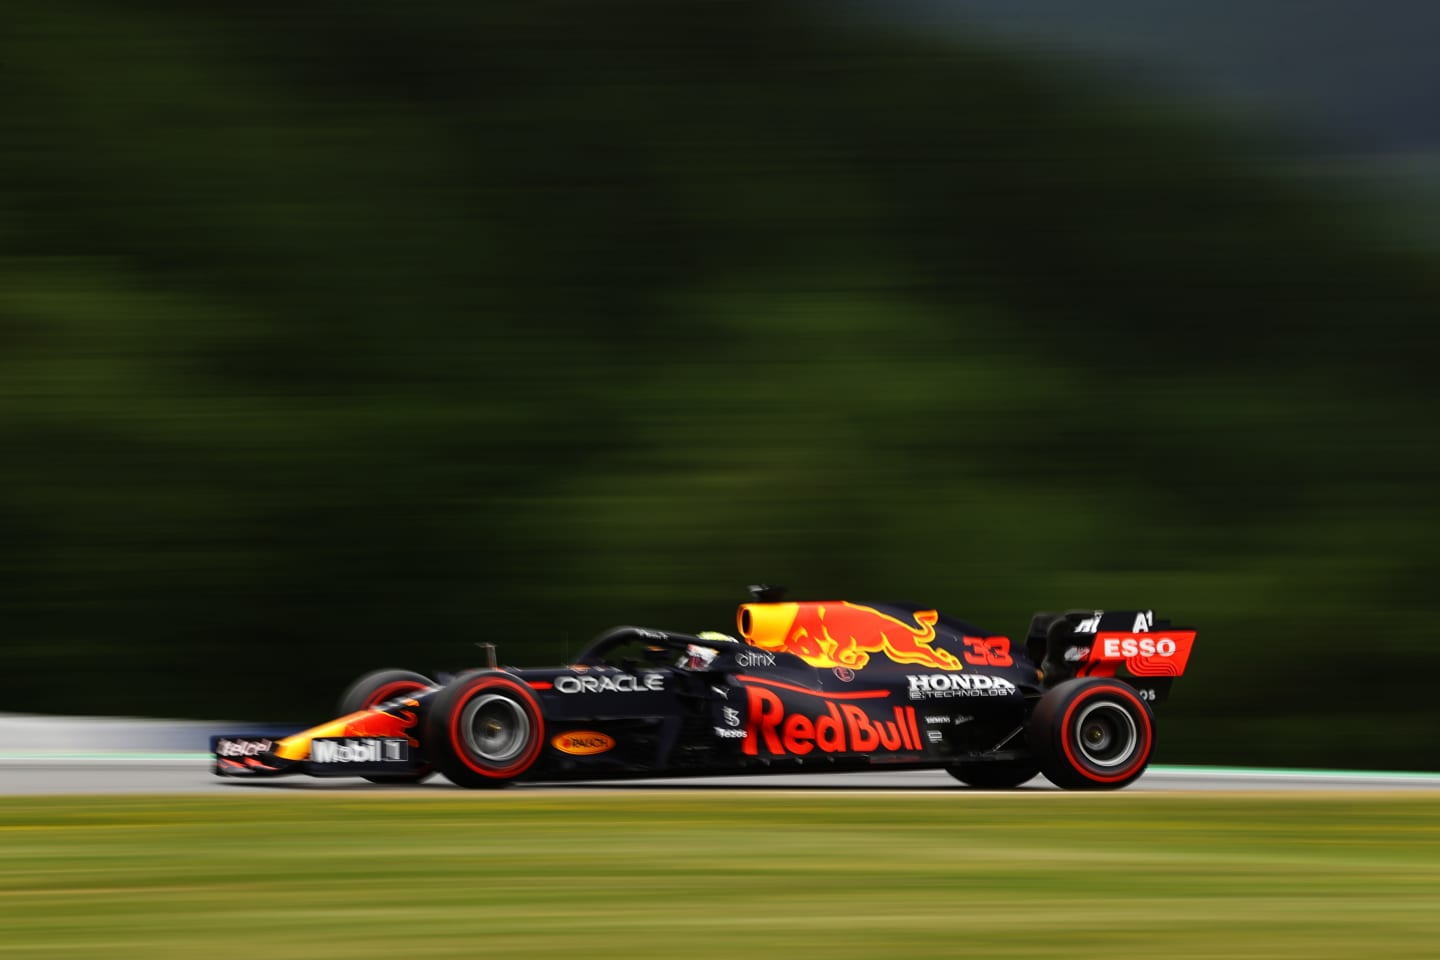 SPIELBERG, AUSTRIA - JULY 02: Max Verstappen of the Netherlands driving the (33) Red Bull Racing RB16B Honda during practice ahead of the F1 Grand Prix of Austria at Red Bull Ring on July 02, 2021 in Spielberg, Austria. (Photo by Bryn Lennon/Getty Images)